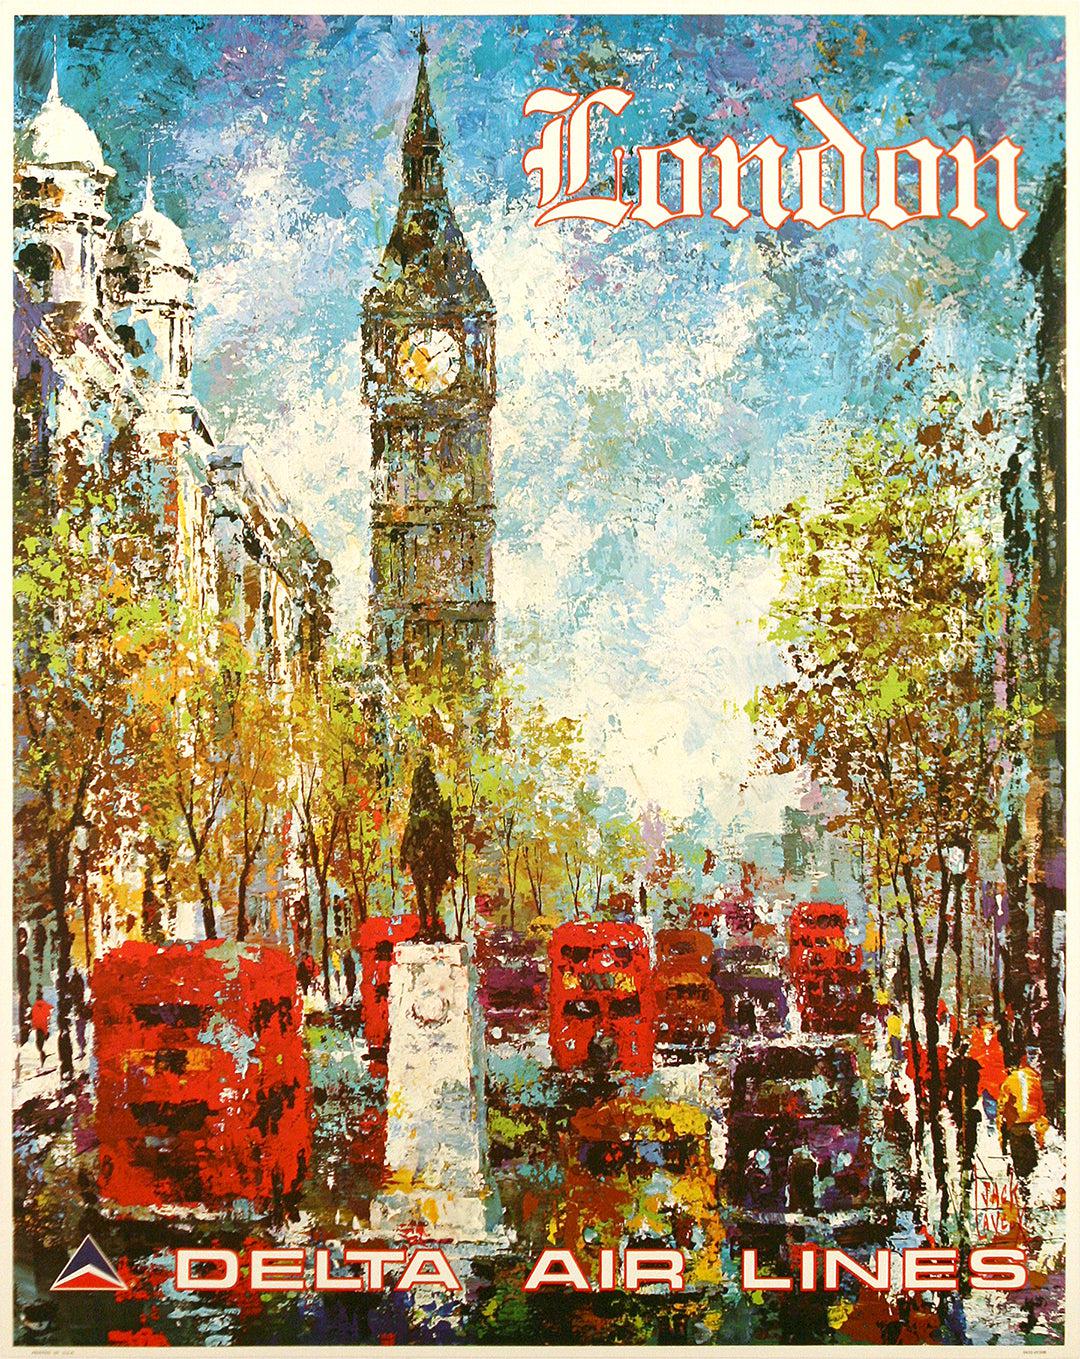 Original 1970's Delta Air Lines Poster for London England by Jack Laycox